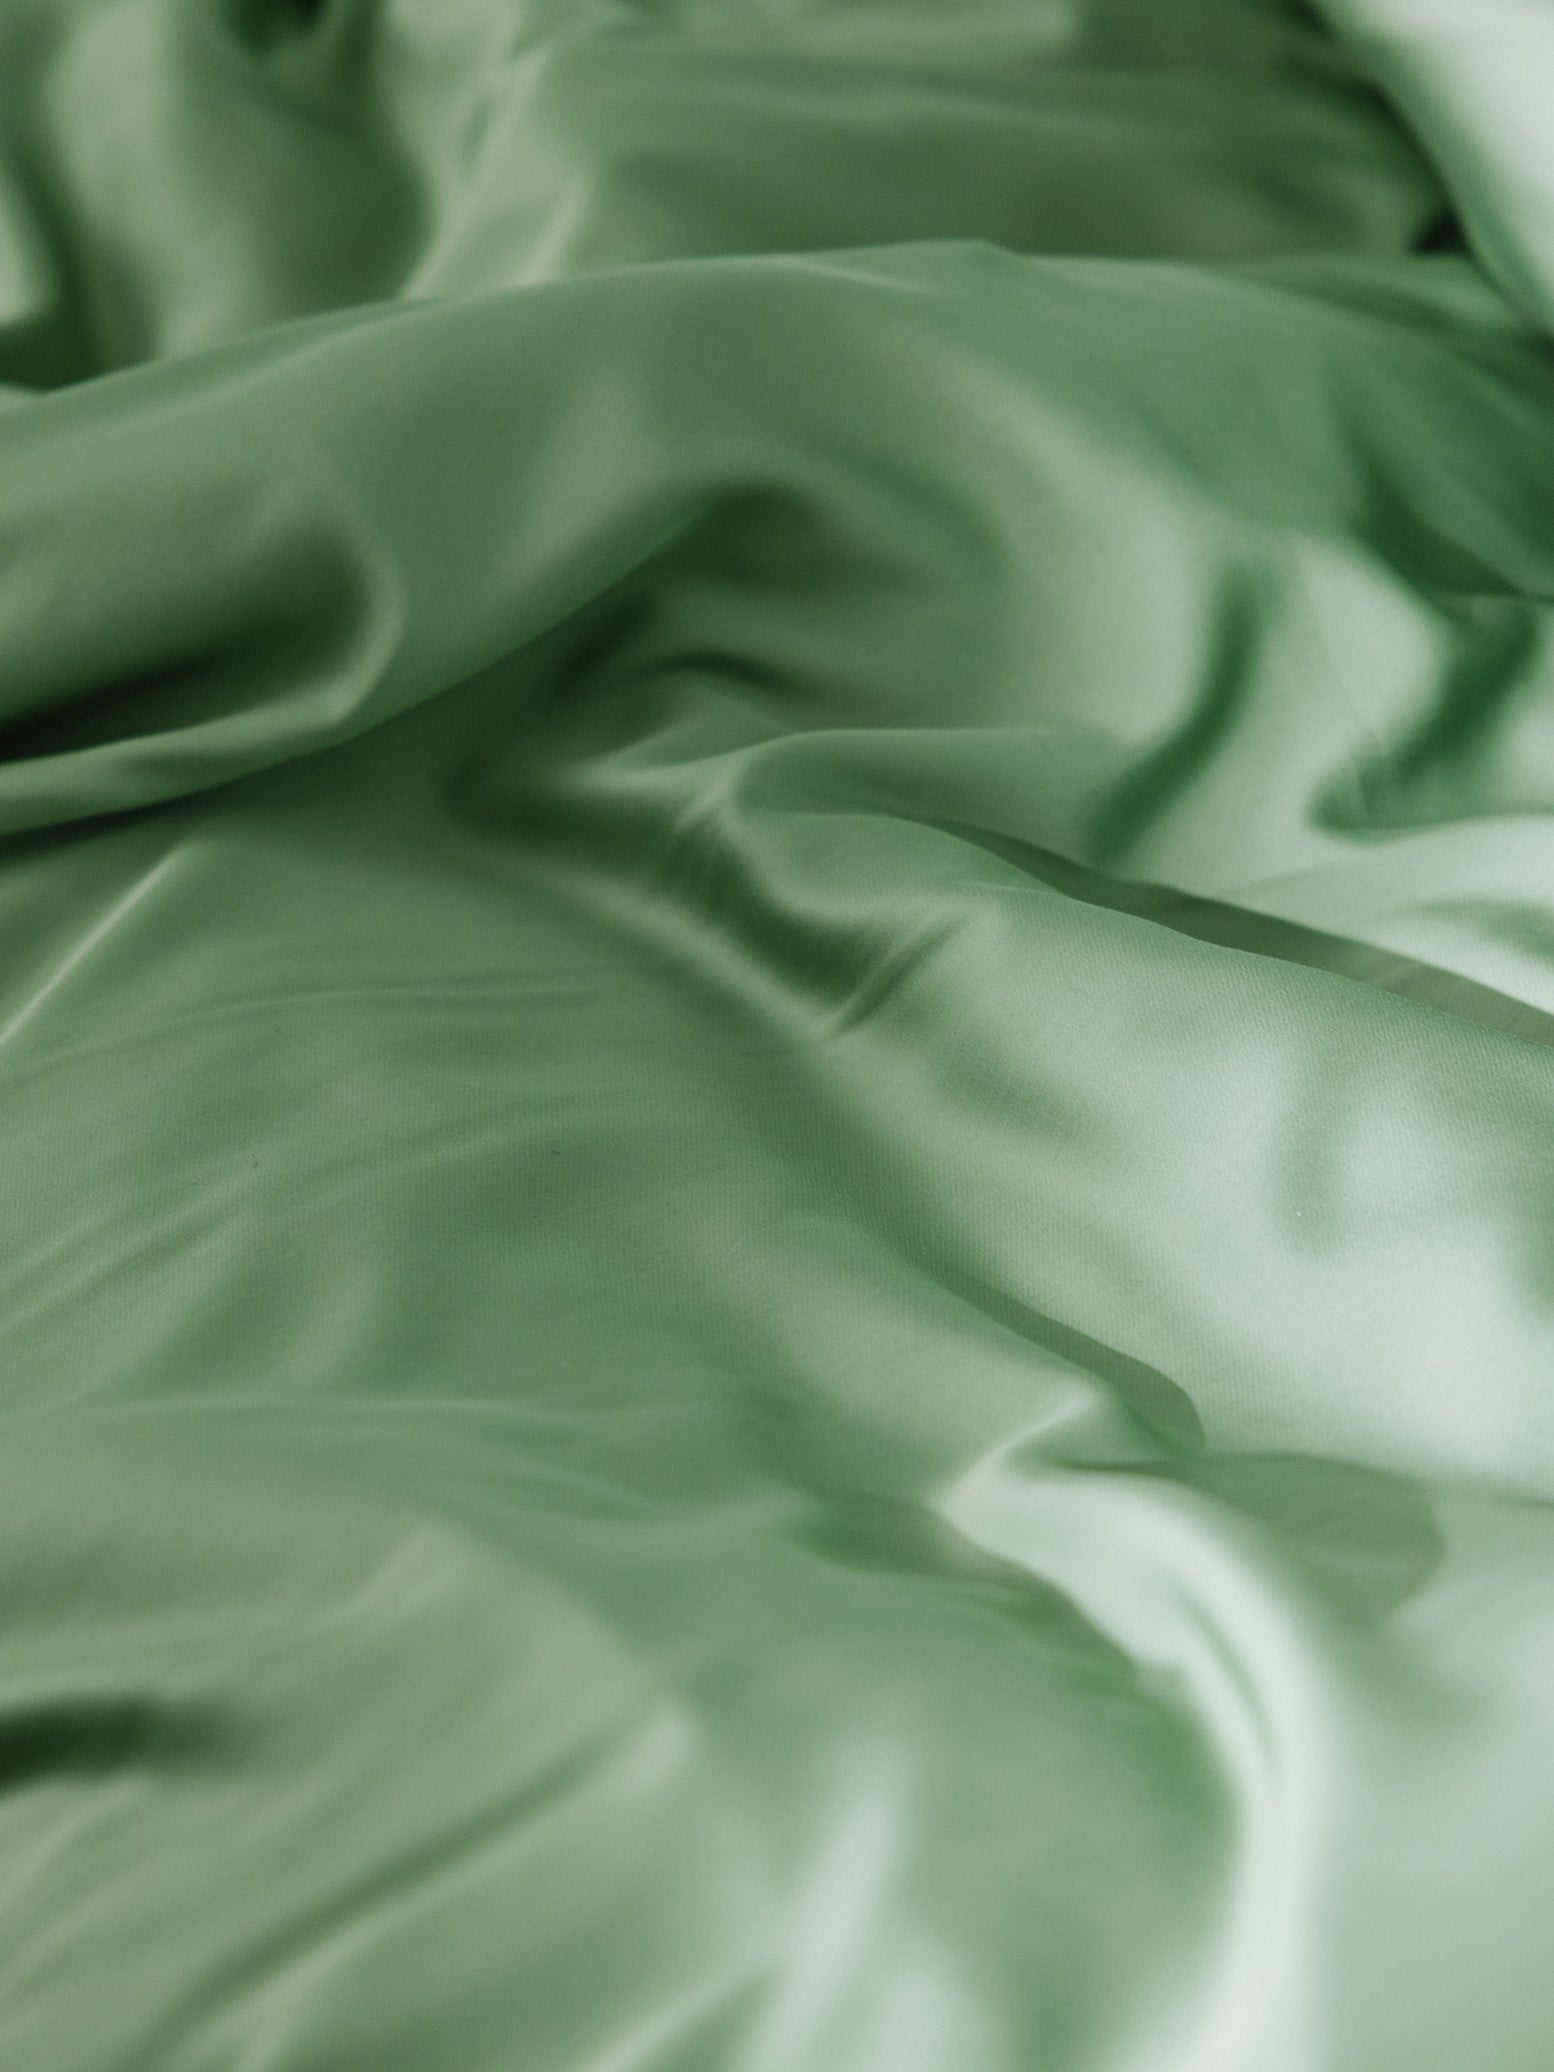 Fern Sheets on bed. Photo taken close up. 